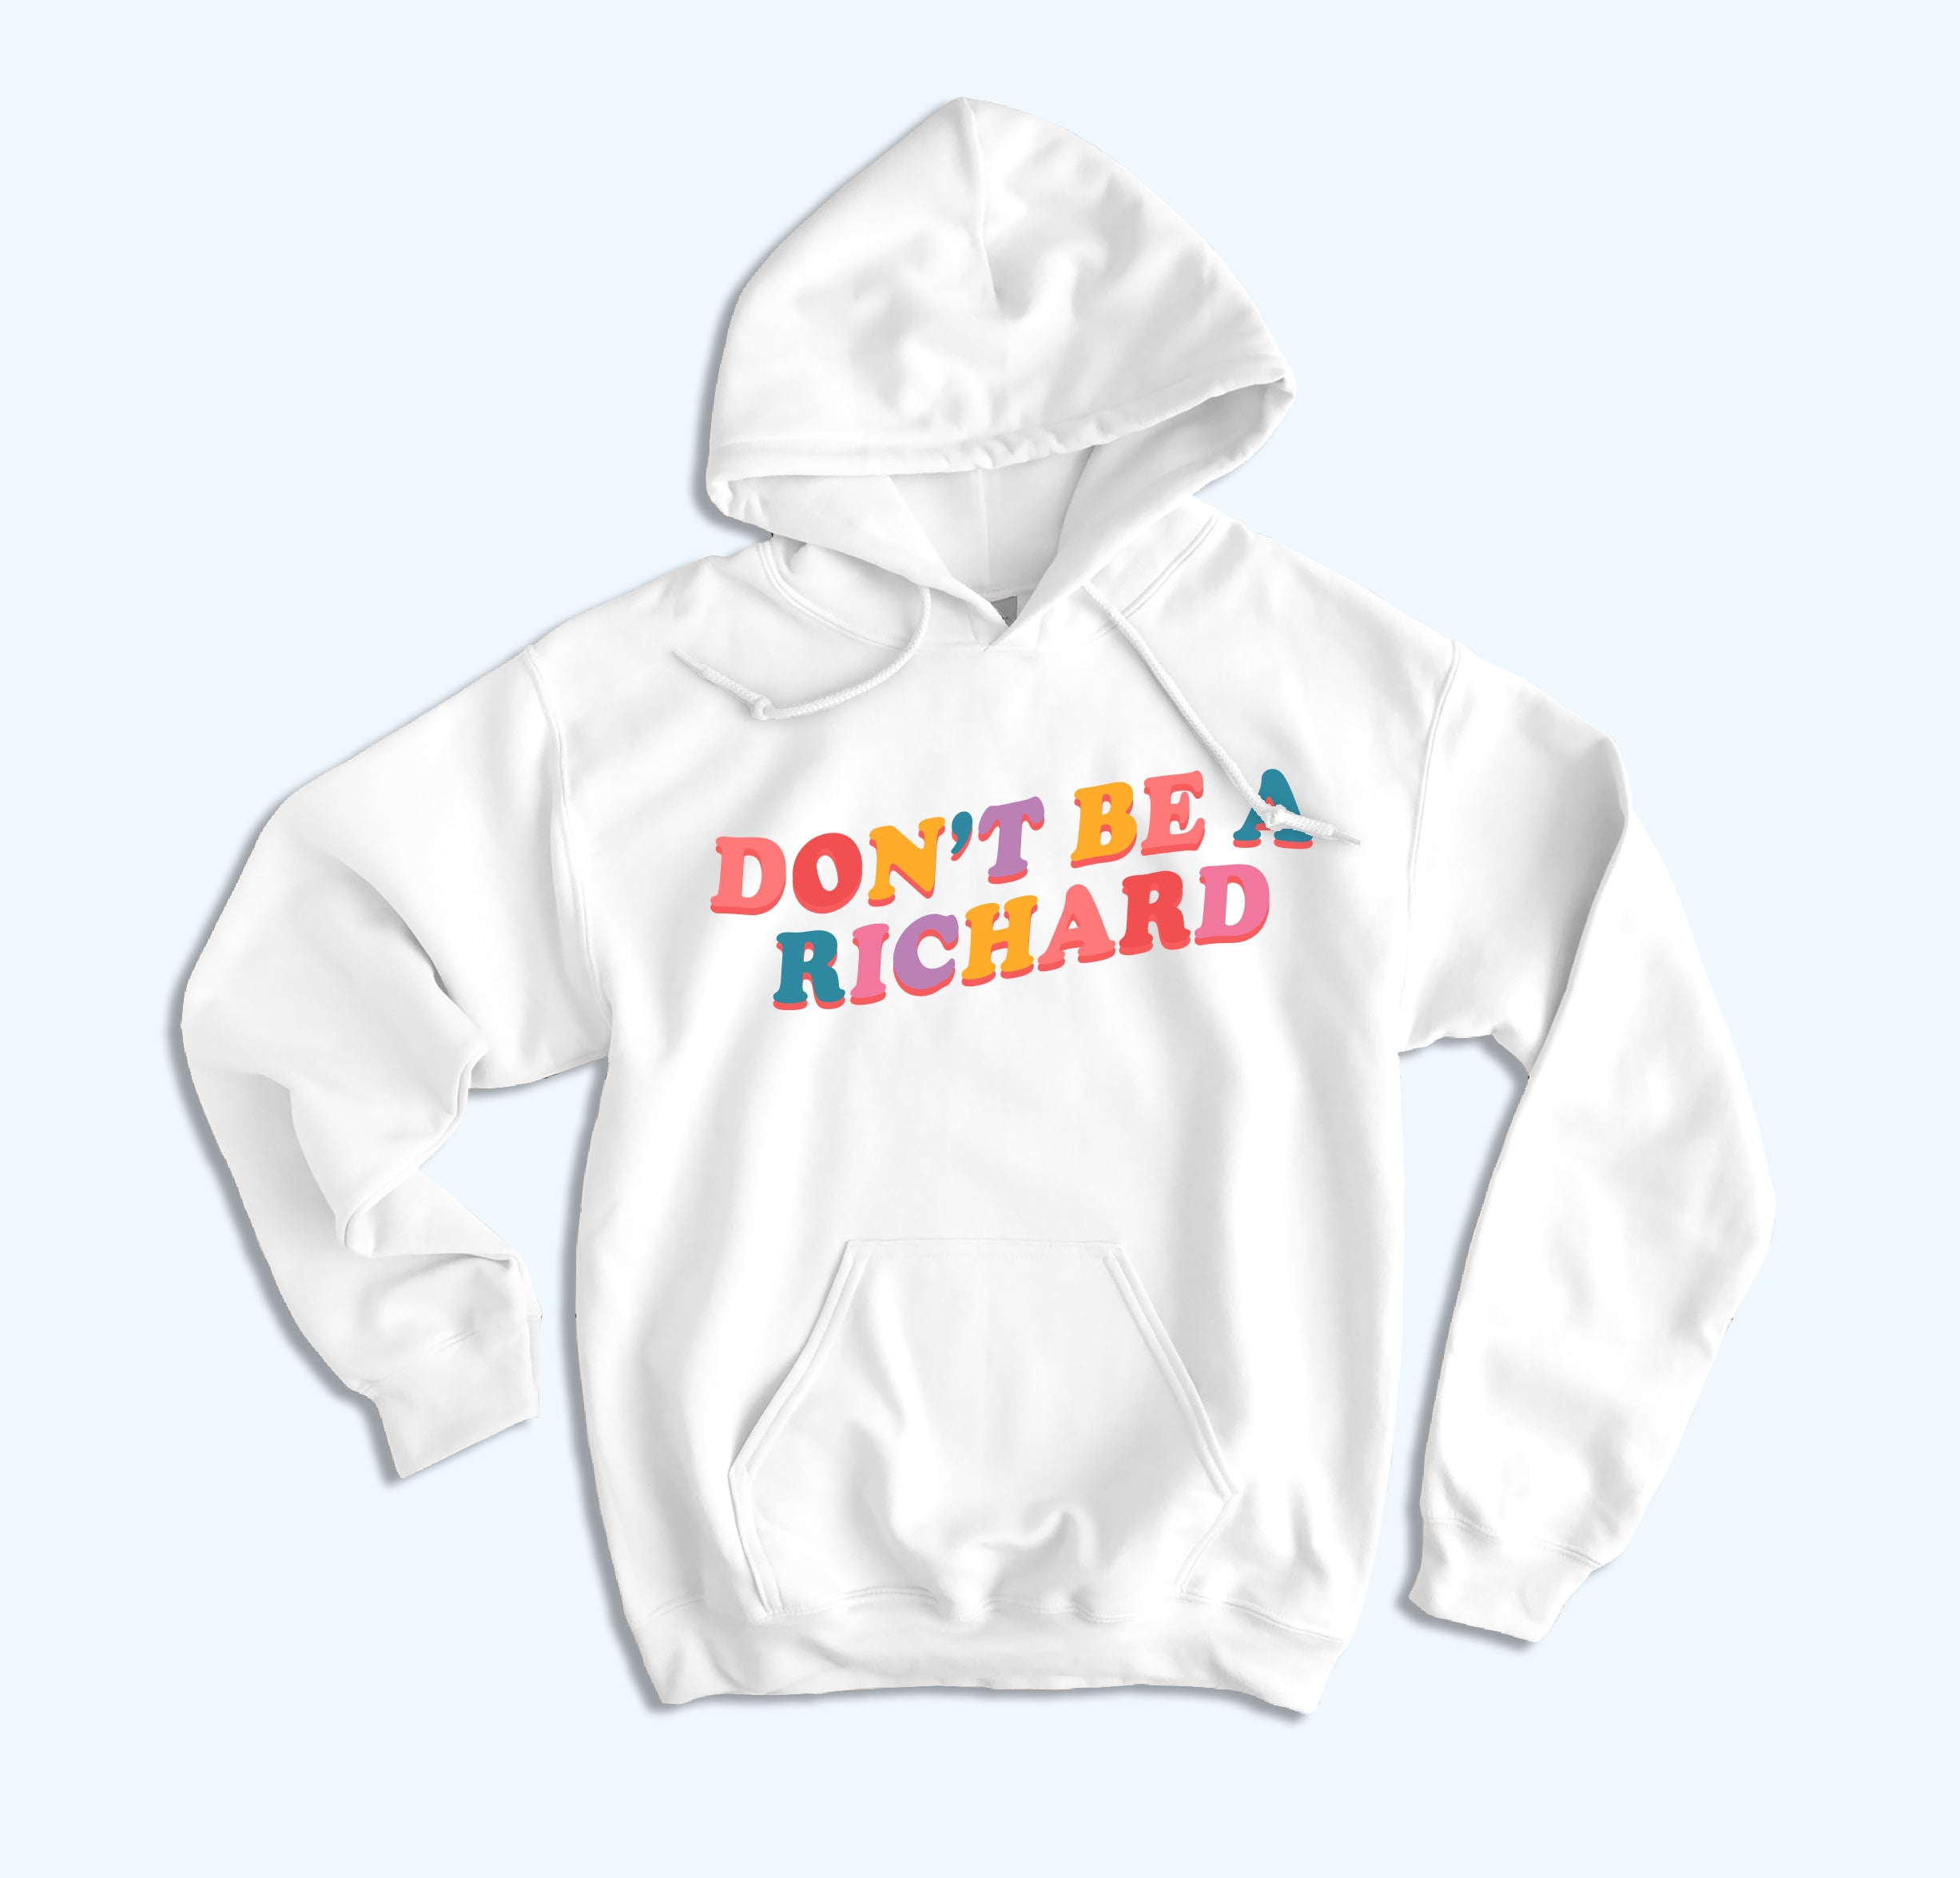 Don't Be A Richard Hoodie